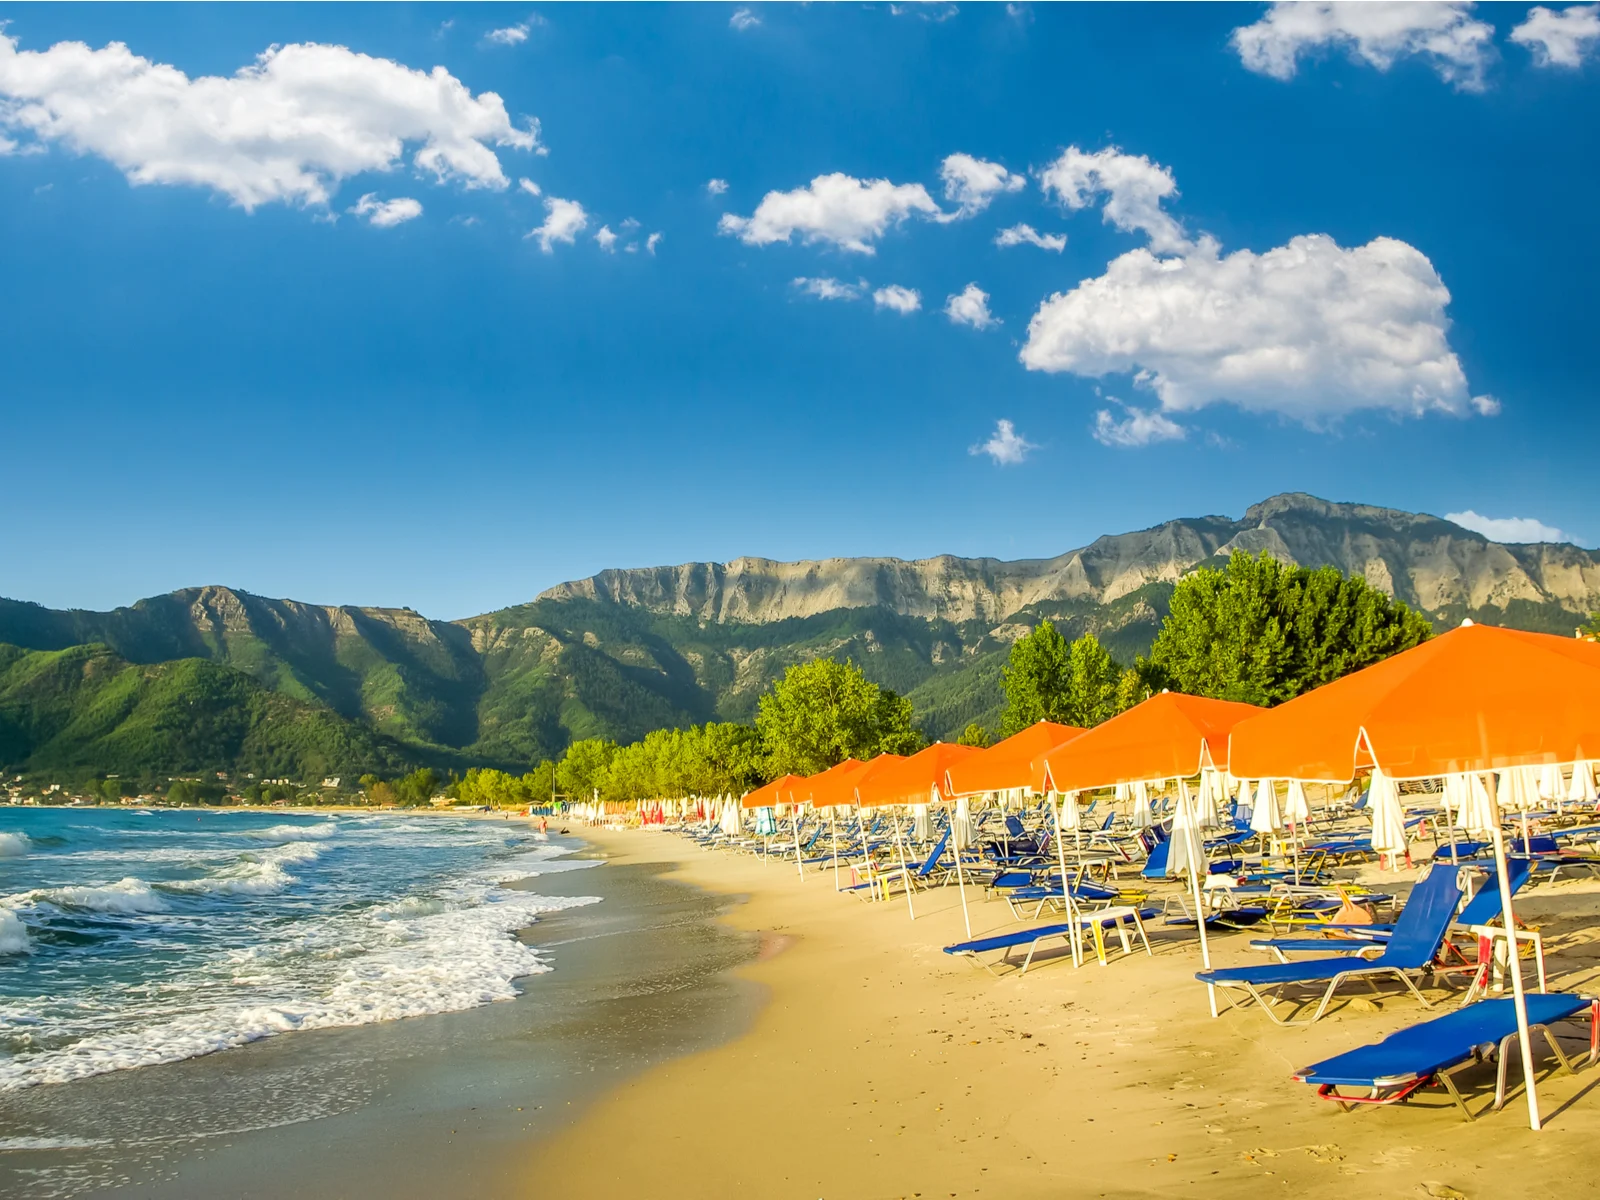 Golden Beach, Thassos, pictured on a sunny day